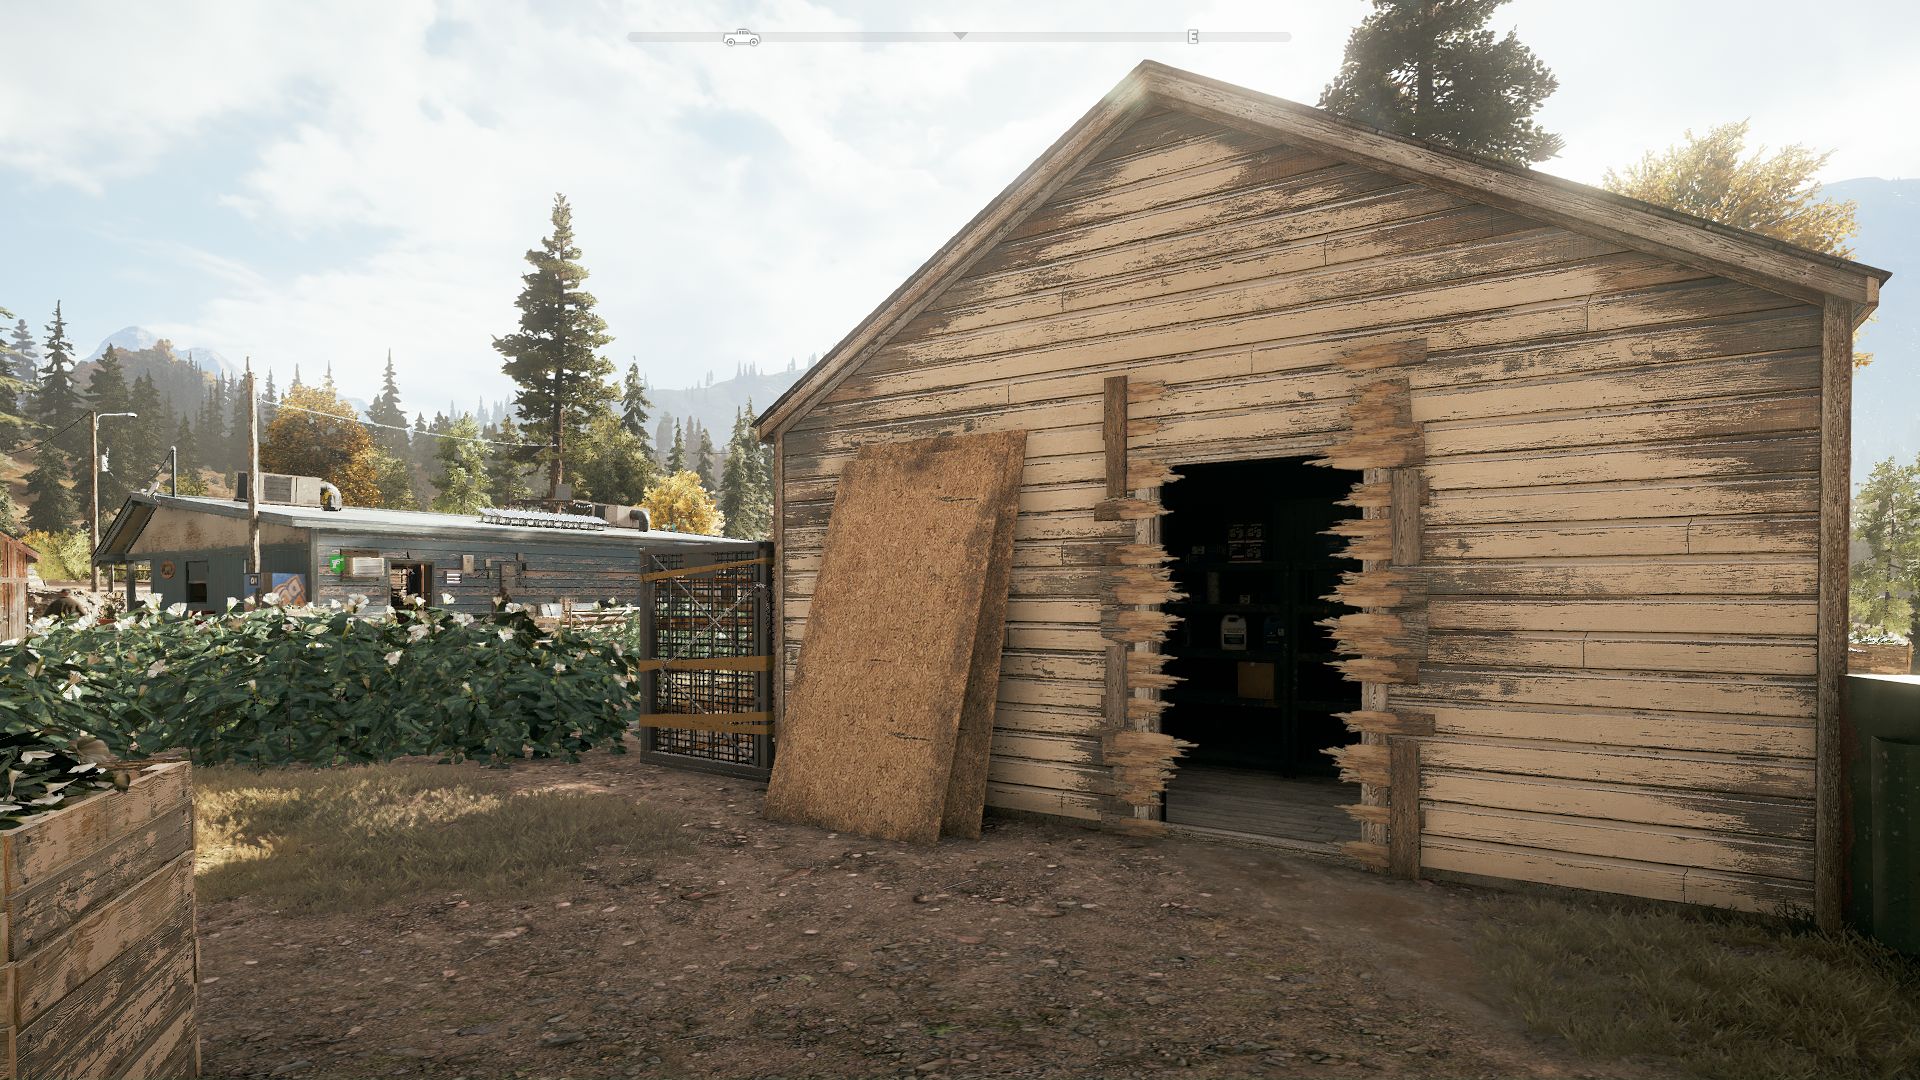 Where to find silver bars in Far Cry 5